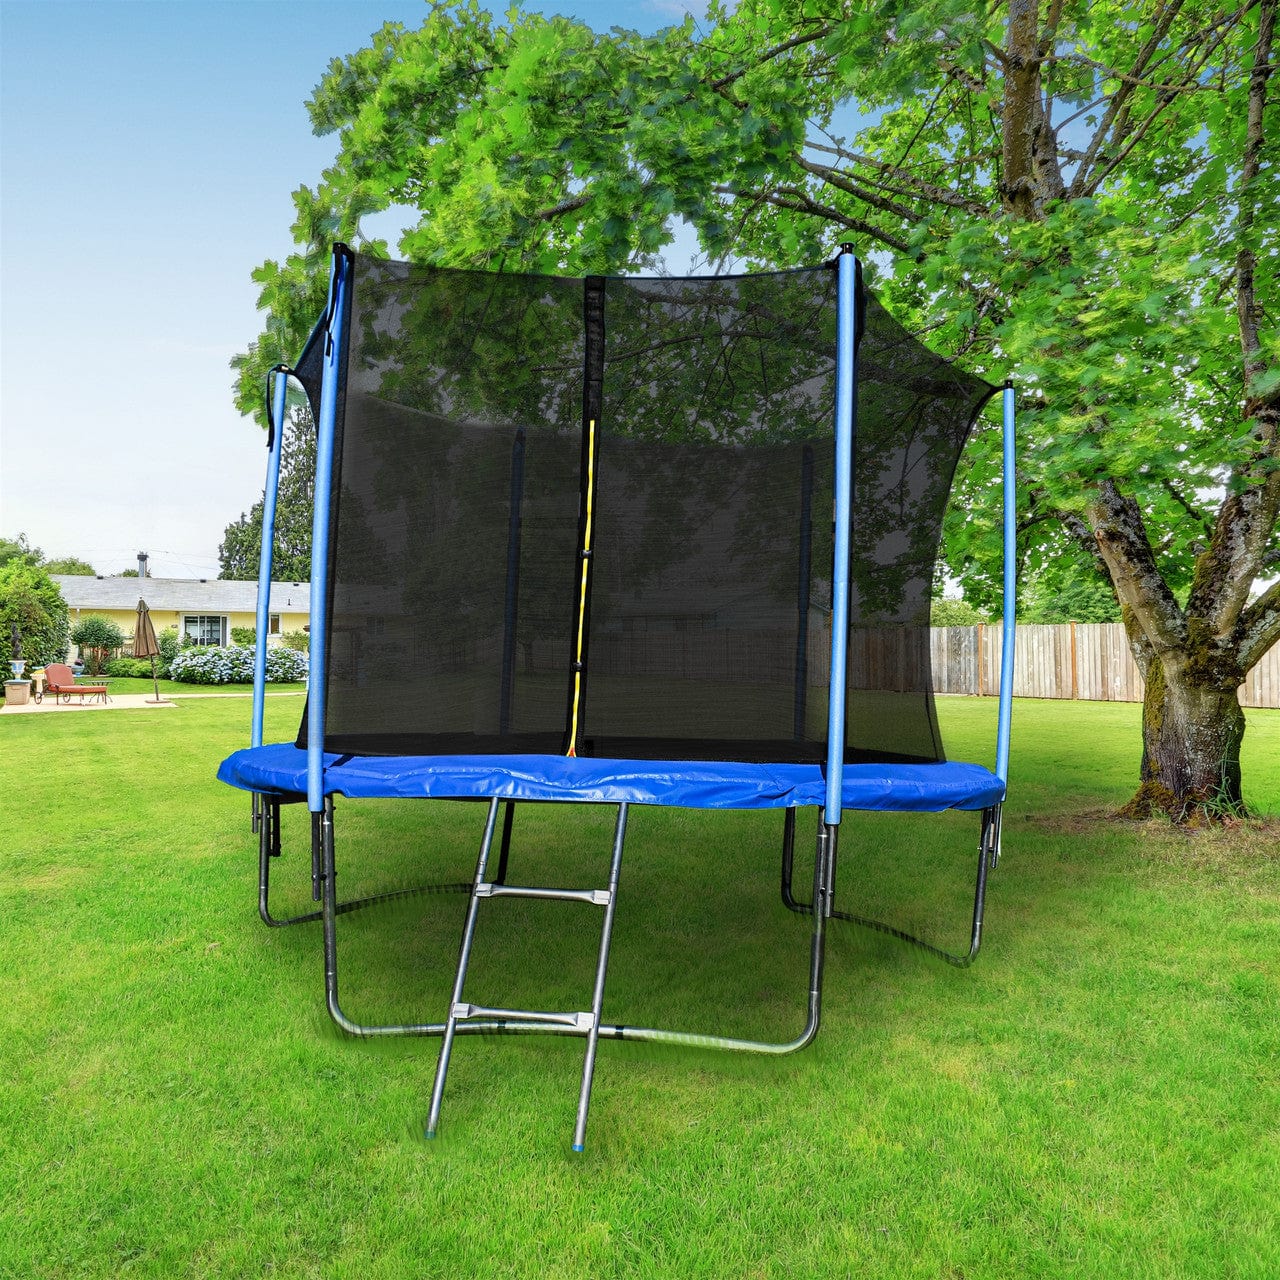 Aleko Trampoline with Safety Net and Ladder - 12 Feet - Black and Blue